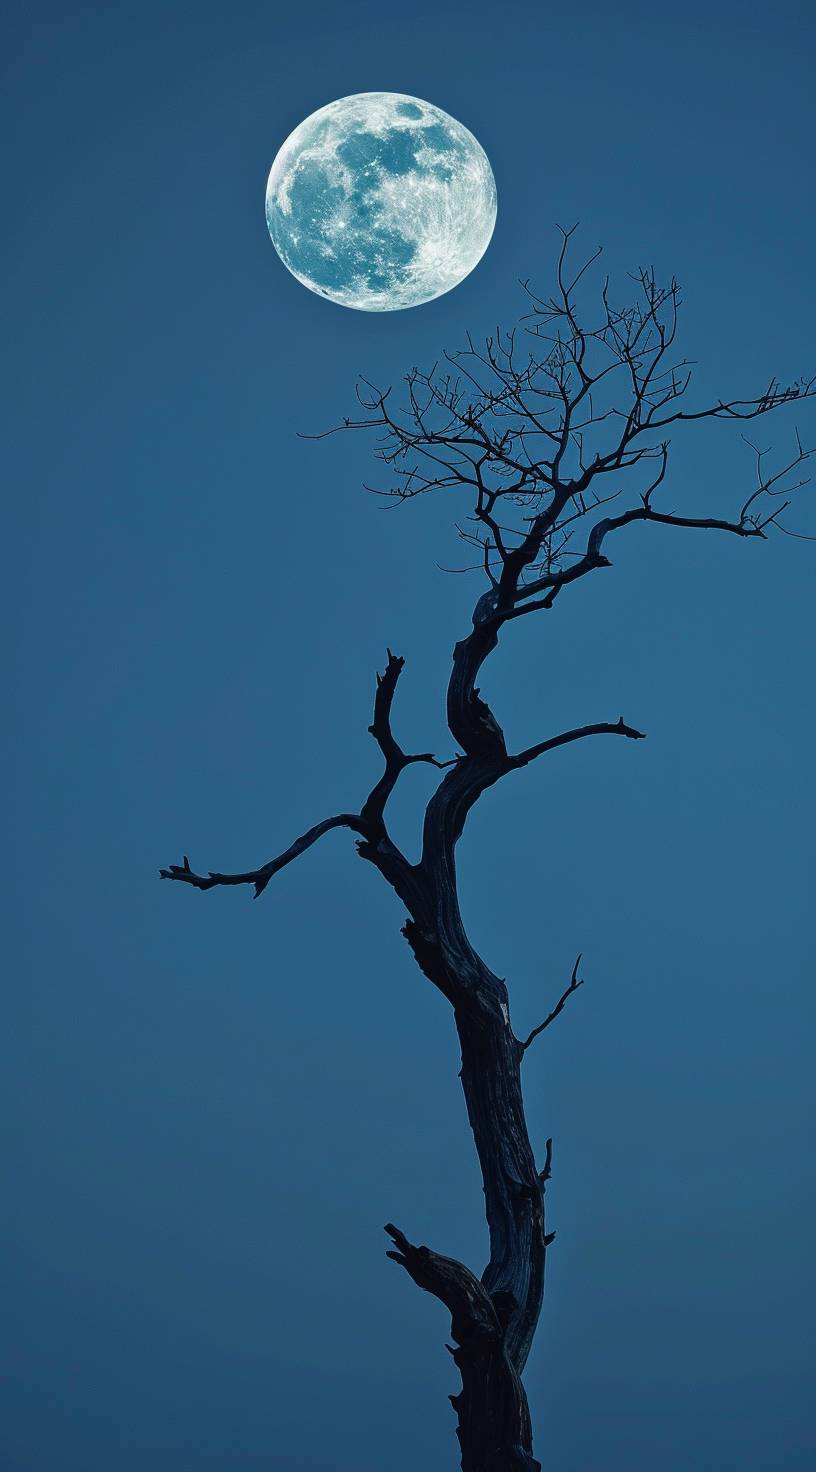 The moon is in the sky, and there's only one branch of an ancient tree with no leaves on it. The background color should be blue gradient. High definition photography